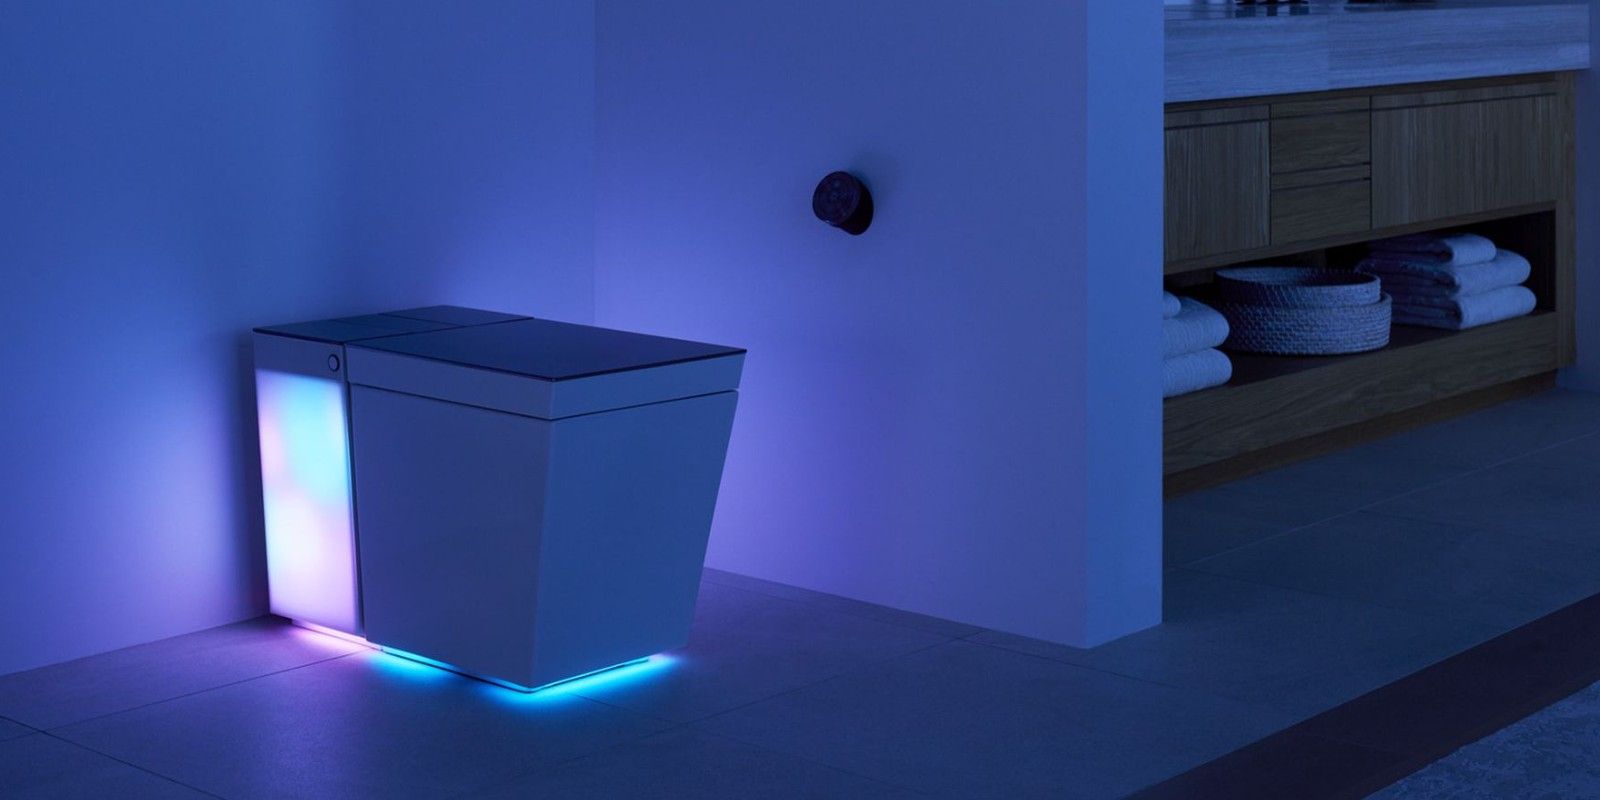 An image of the Numi 2.0 smart toilet with its LEDs on